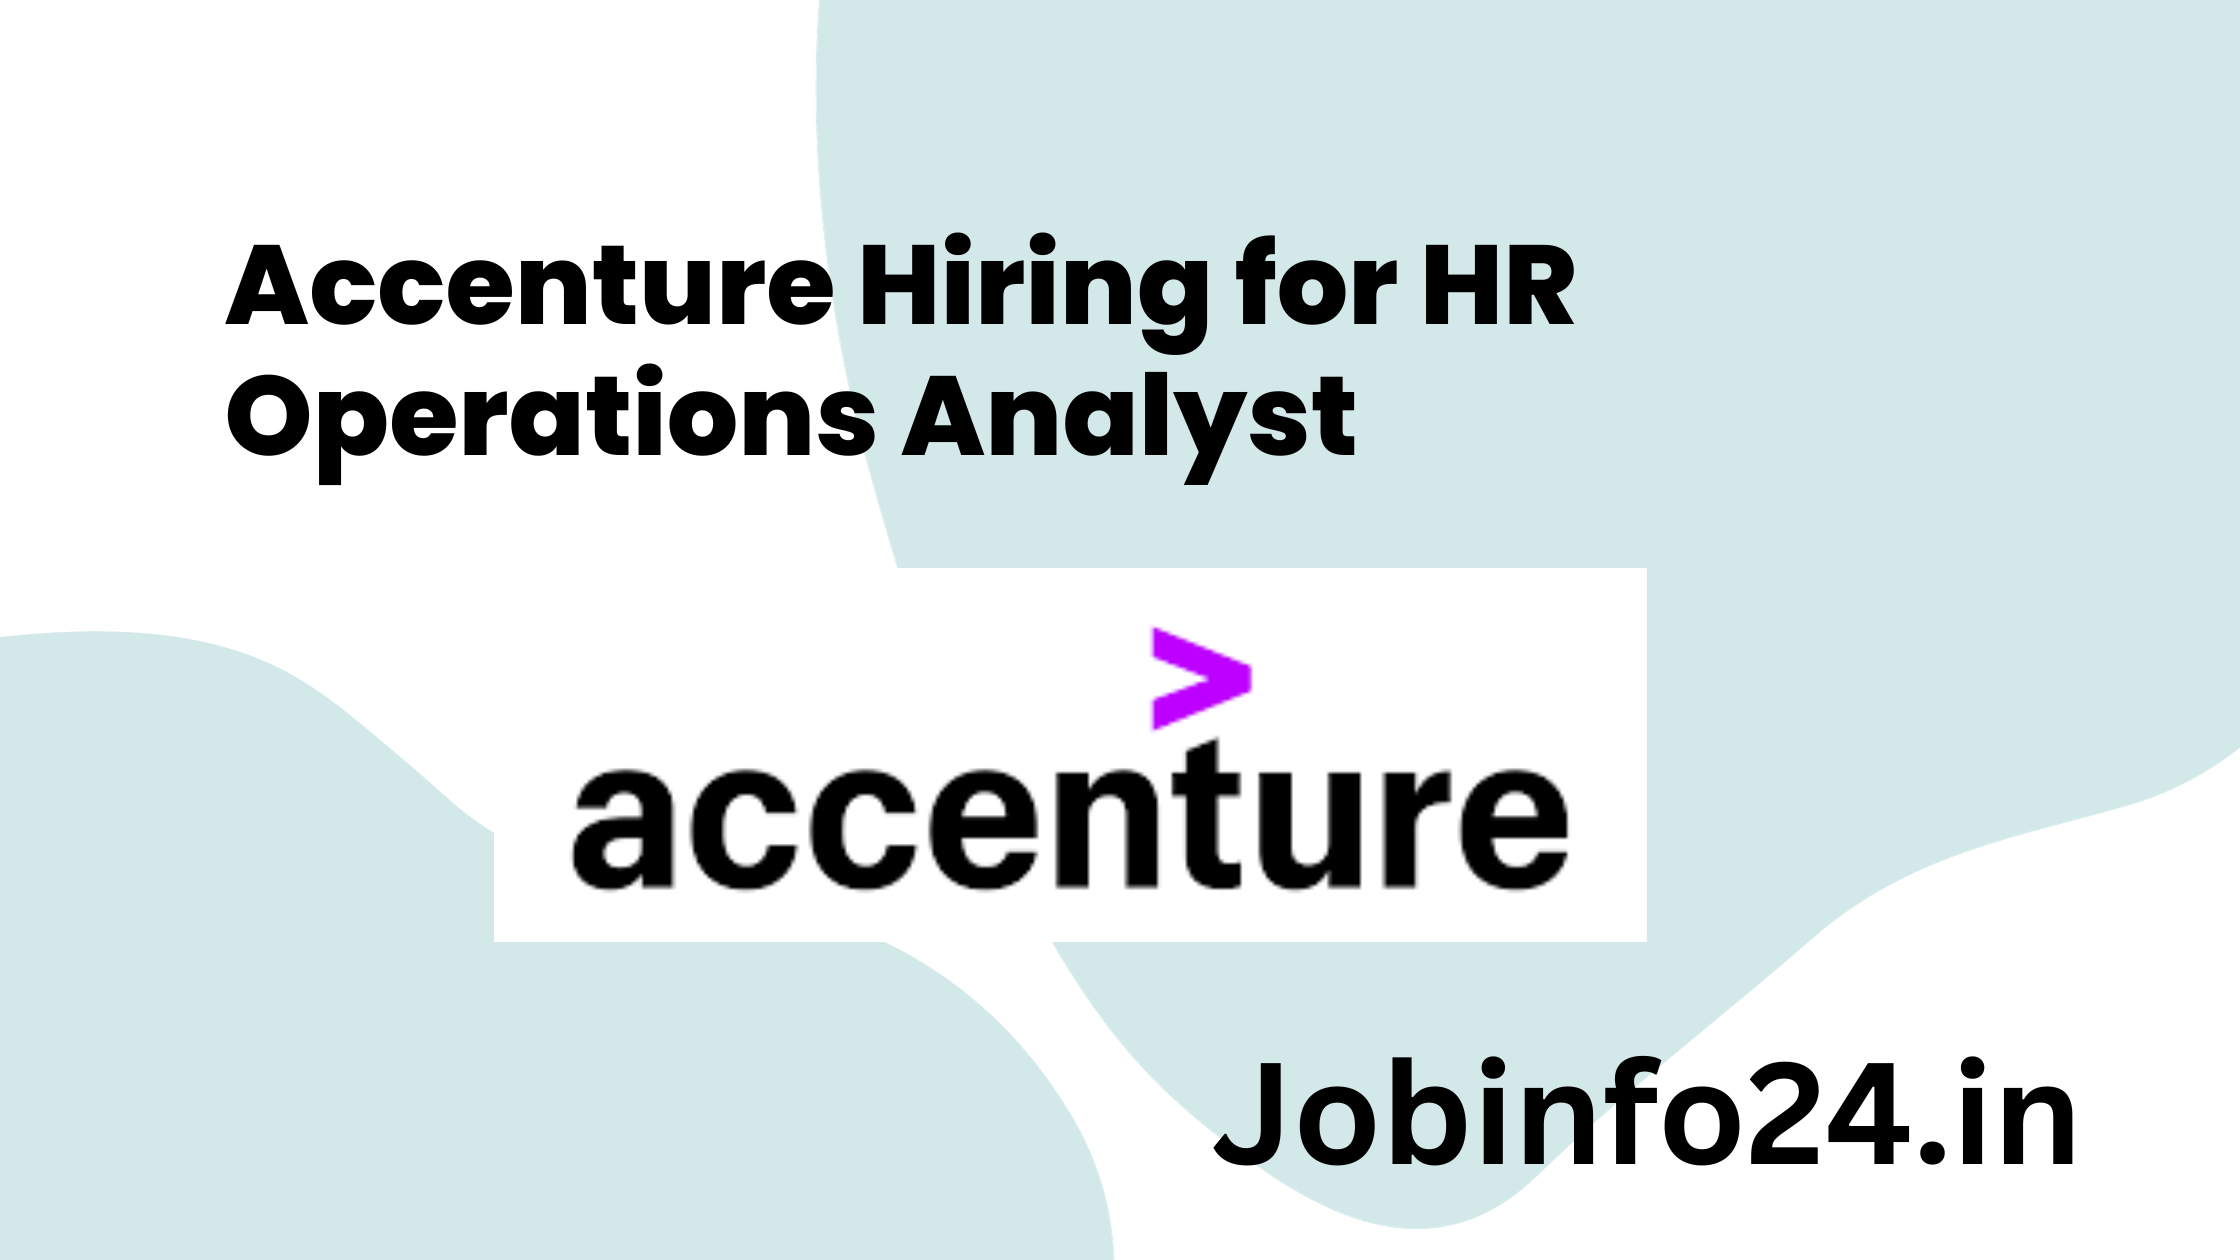 Accenture Hiring for HR Operations Analyst